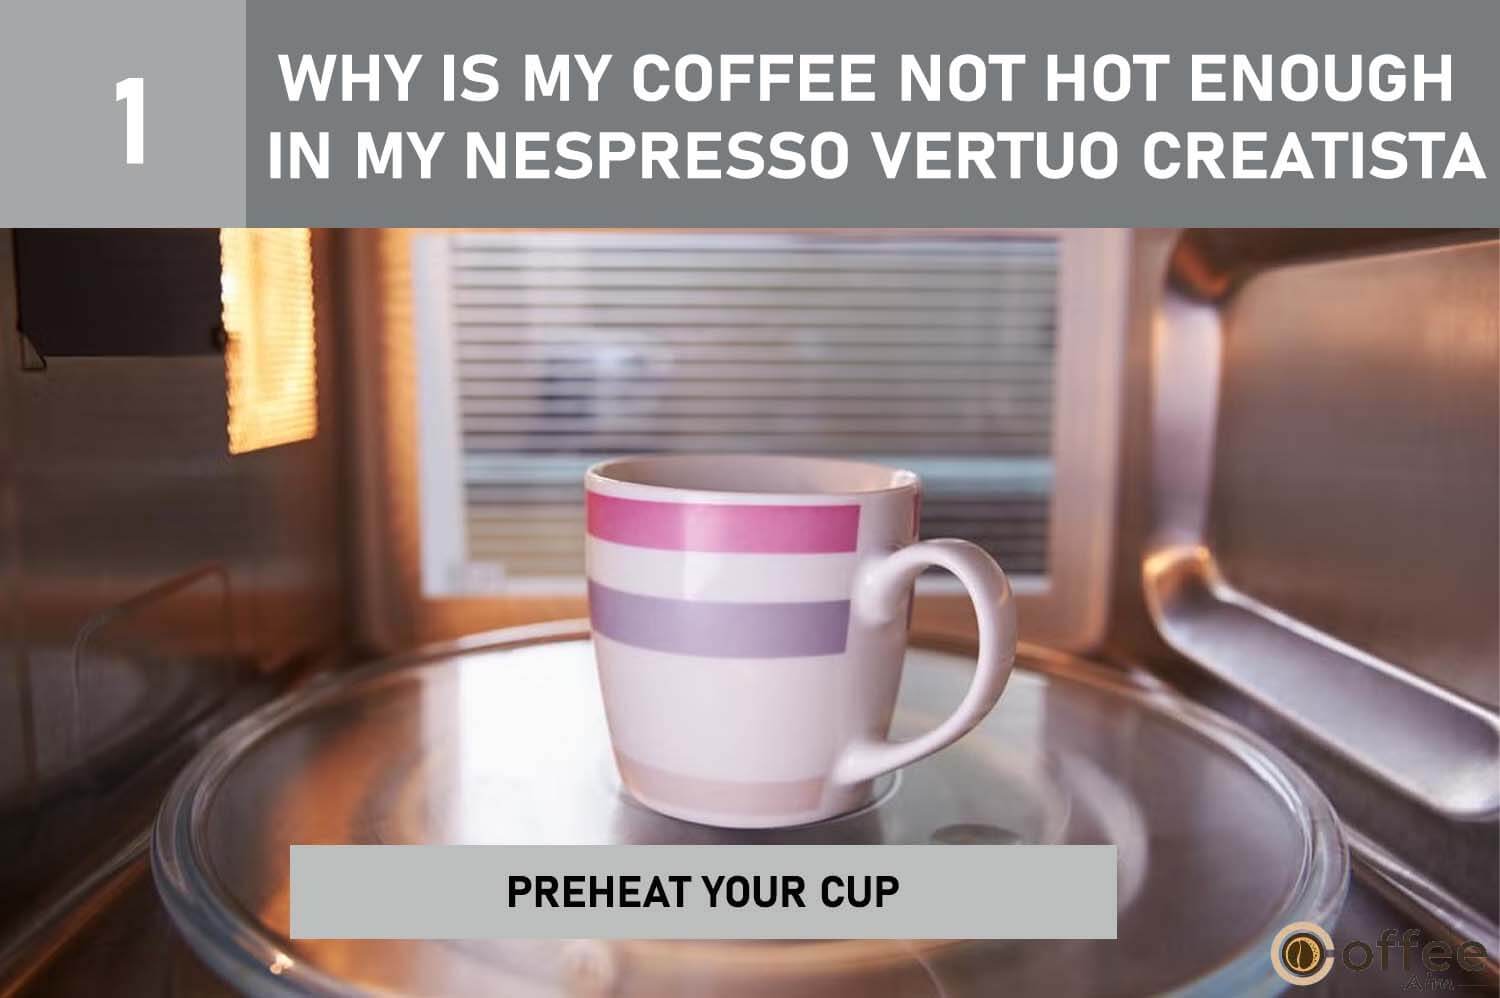 This picture shows how to warm your cup before making coffee in a Nespresso Vertuo Creatista to ensure hotter coffee.